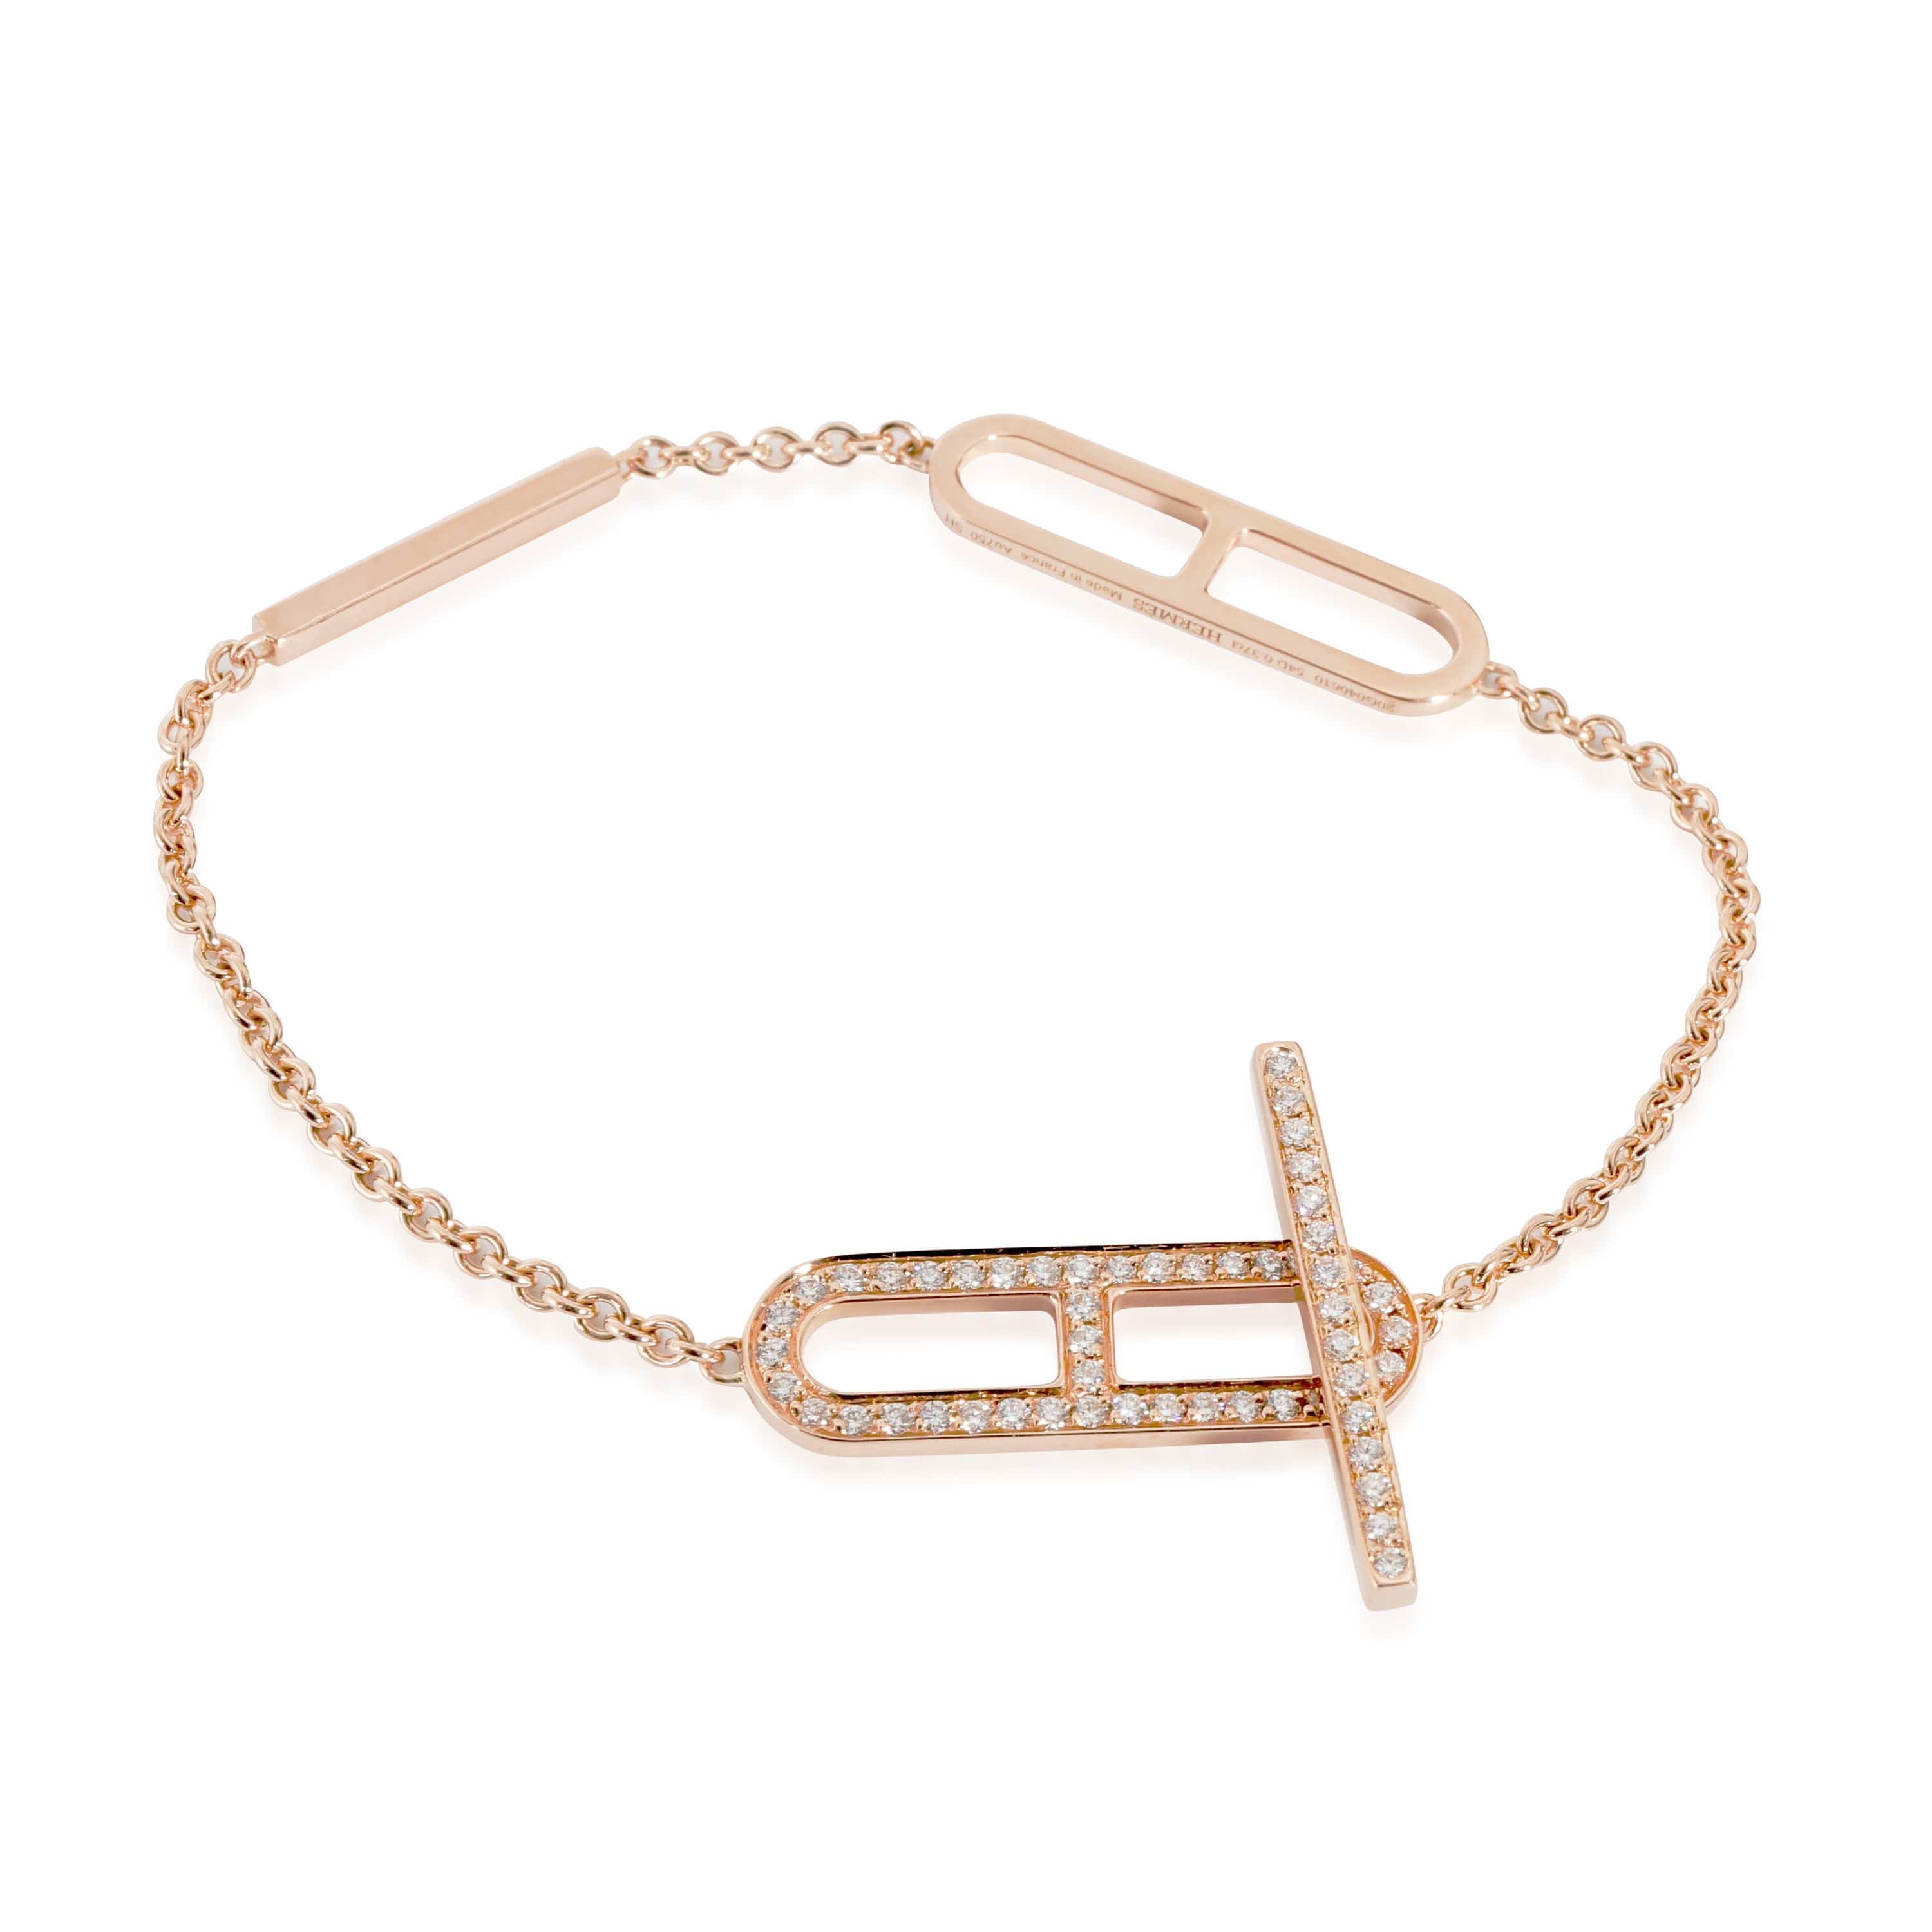 Hermès Hermes Ever Chaine D'Ancre Bracelet, Small Model in 18KT Rose Gold 0.37ctw